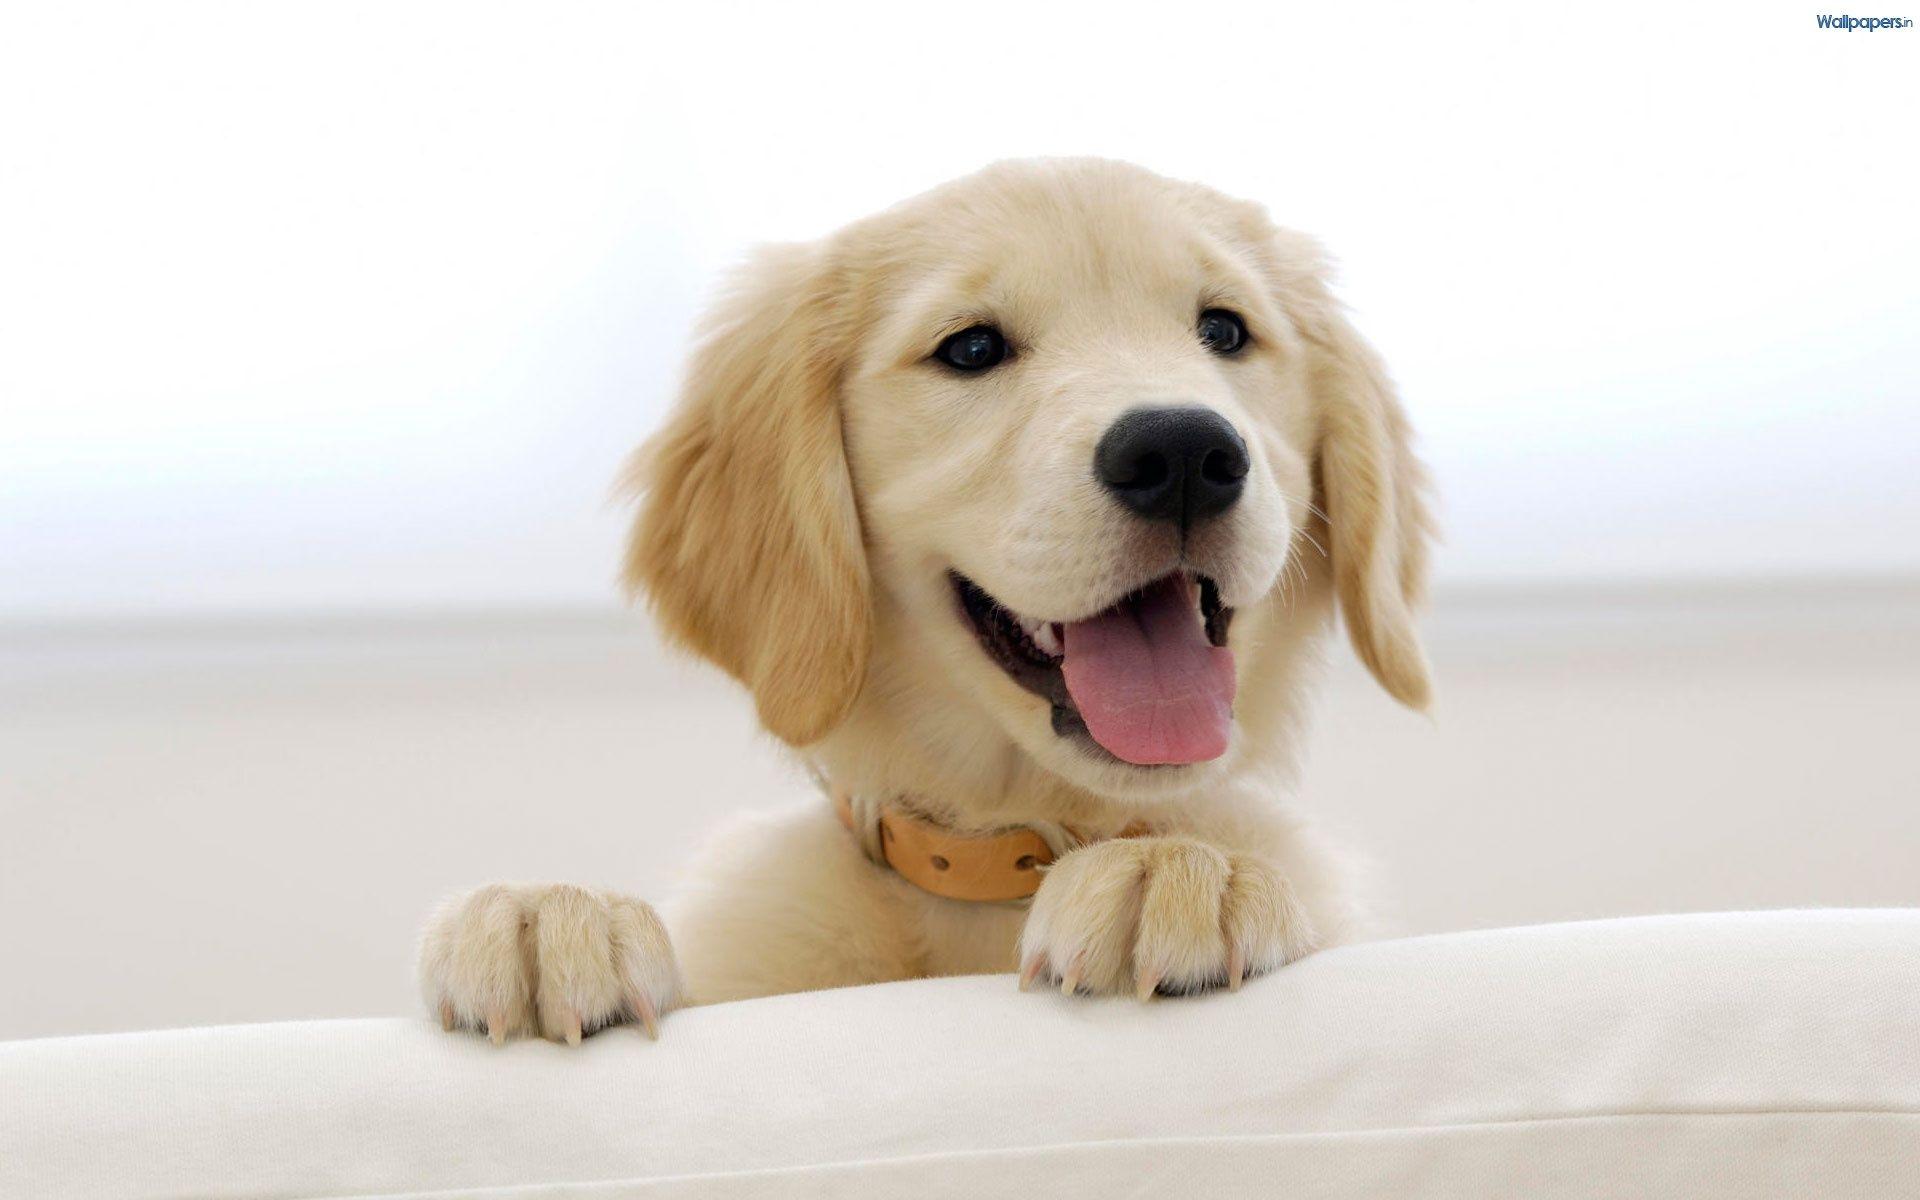 Cute Puppy Picture 21 390544 High Definition Wallpaper. wallalay